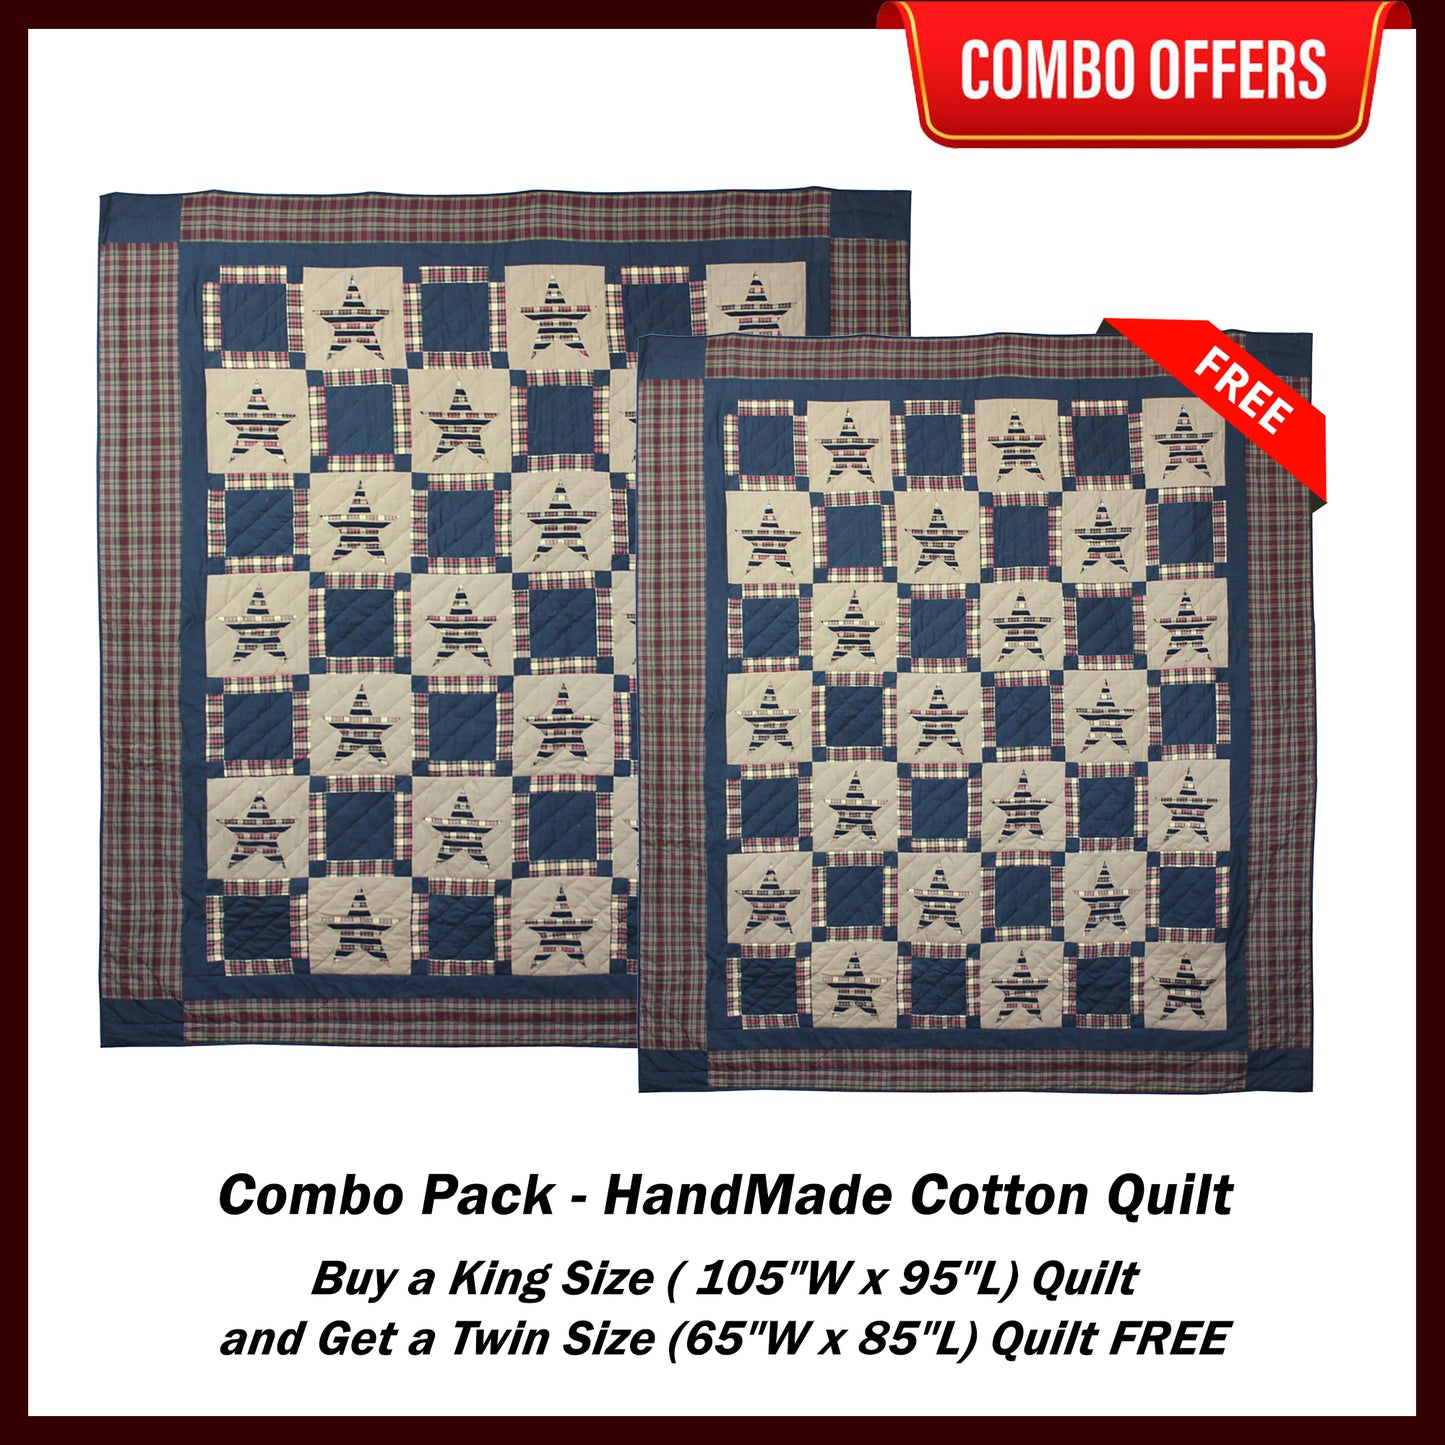 Tartan Star Handmade Cotton Quilt - Buy a King Size Quilt and Get a Twin Size Quilt FREE